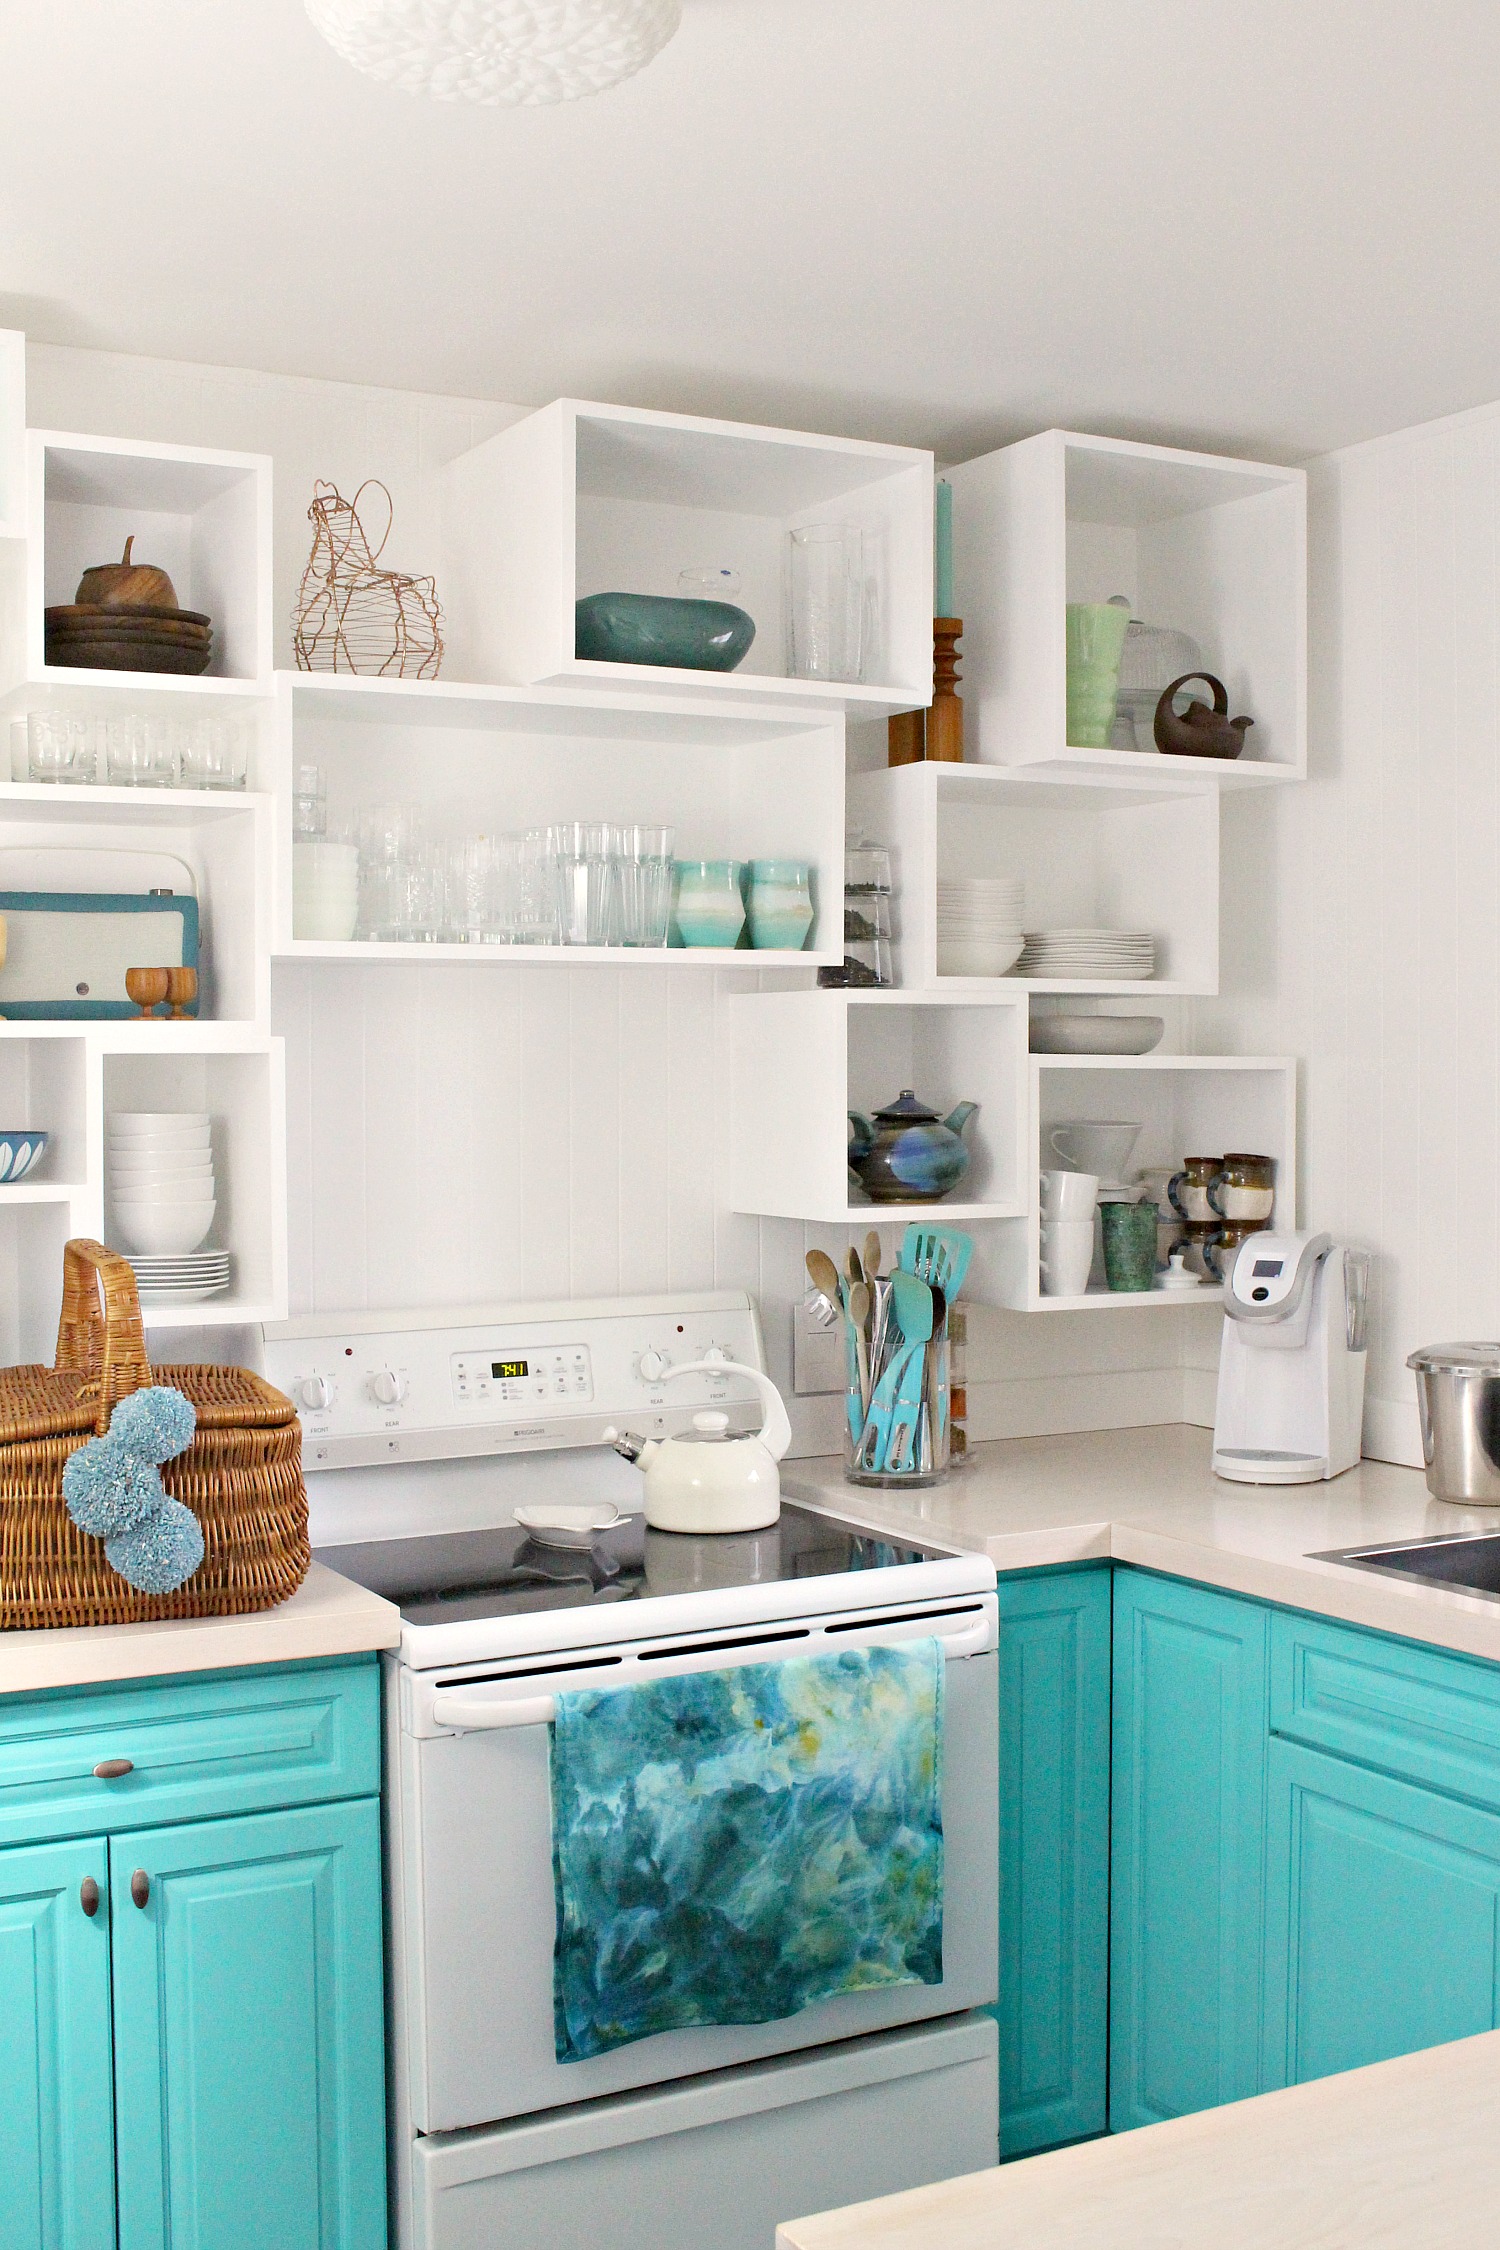 Surprise! Sherwin Williams Watery Cabinet Color + This DIY Kitchen ...